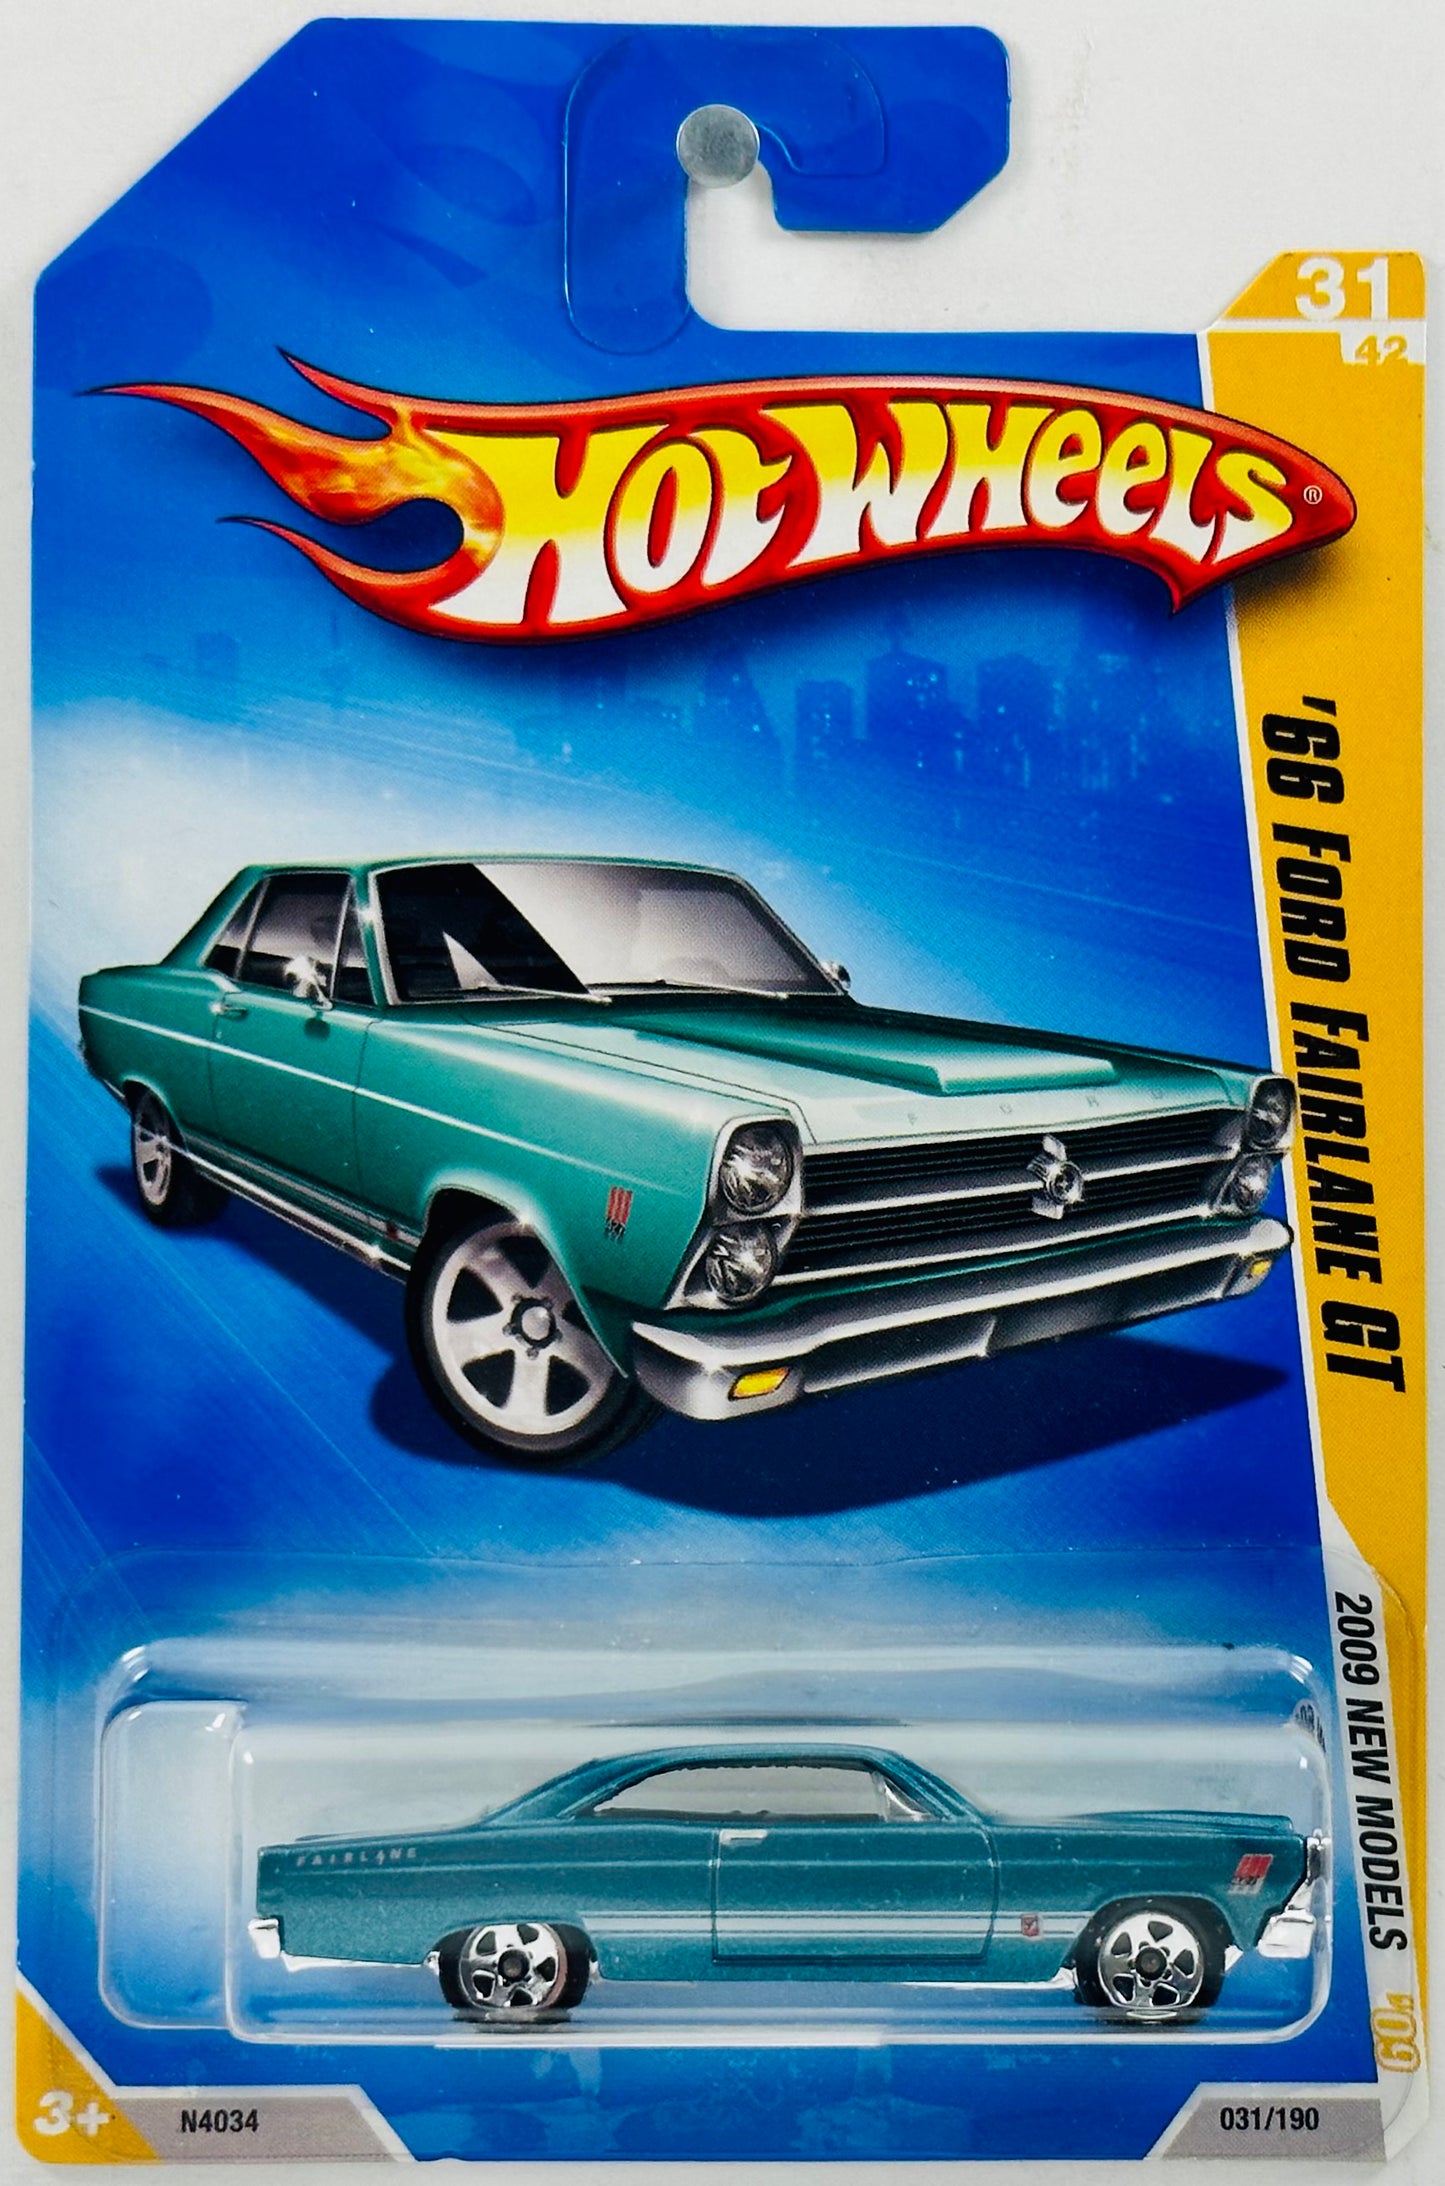 Hot Wheels 2009 - Collector # 031/190 - New Models 31/42 - '66 Ford Fairlane GT - Metalflake Teal - Black Box w/ Sliver Cutout 427 - USA